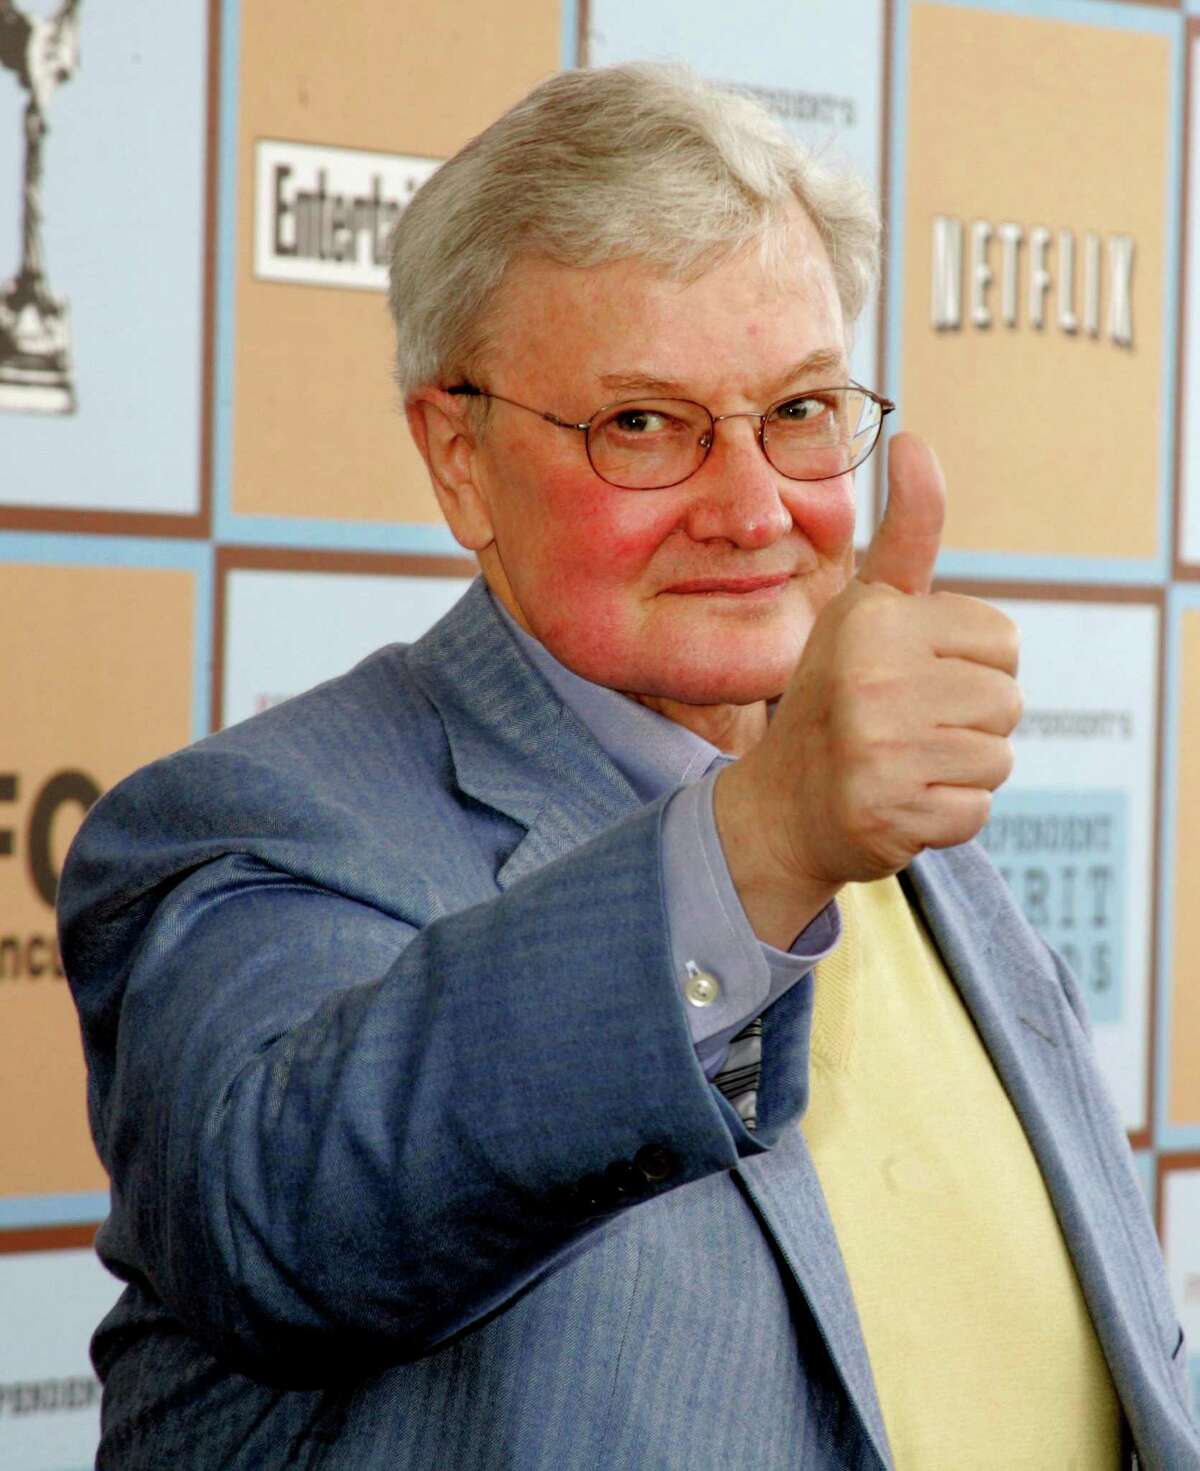 Film critic Roger Ebert gives a thumbs-up sign as he arrives at the Independent Spirit Awards in Santa Monica, California, in this March 4, 2006 file photo. Ebert announced July 21, 2008 that he and Richard Roeper are departing the movie review show that bears their names, leaving the future of the influential program unclear. REUTERS/Fred Prouser/Files (UNITED STATES)